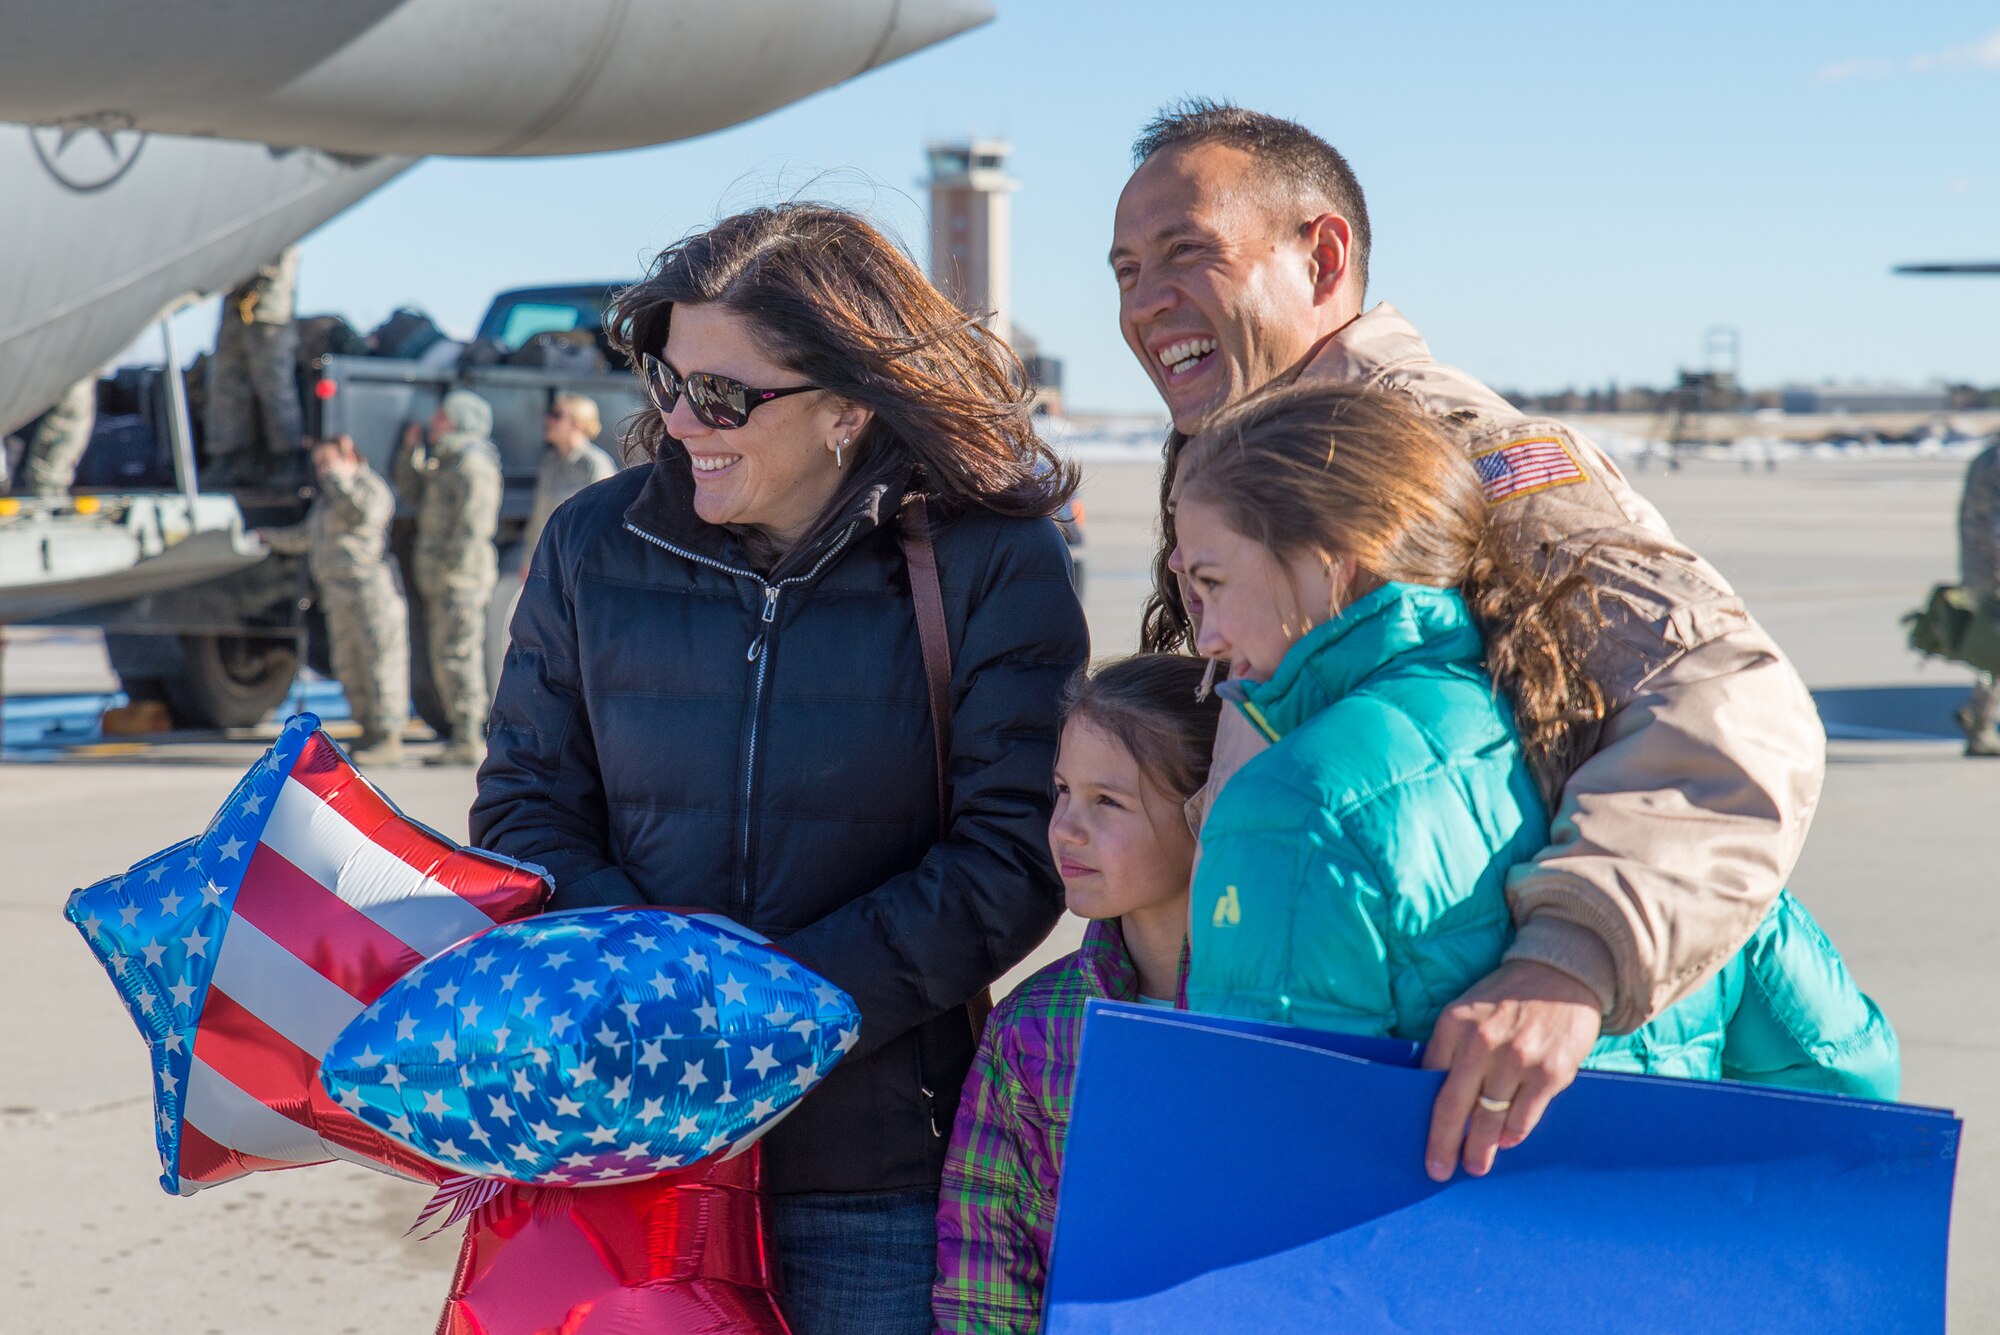 Family members welcome home U.S. Air Force Airmen from the 153rd Airlift Wing, Wyoming Air National Guard Jan. 8, 2015 at Cheyenne Air National Guard Base in Cheyenne, Wyoming. Around 60 members of the 153rd Airlift Wing, Wyoming Air National Guard, returned home this week following a two-month deployment to Southwest Asia